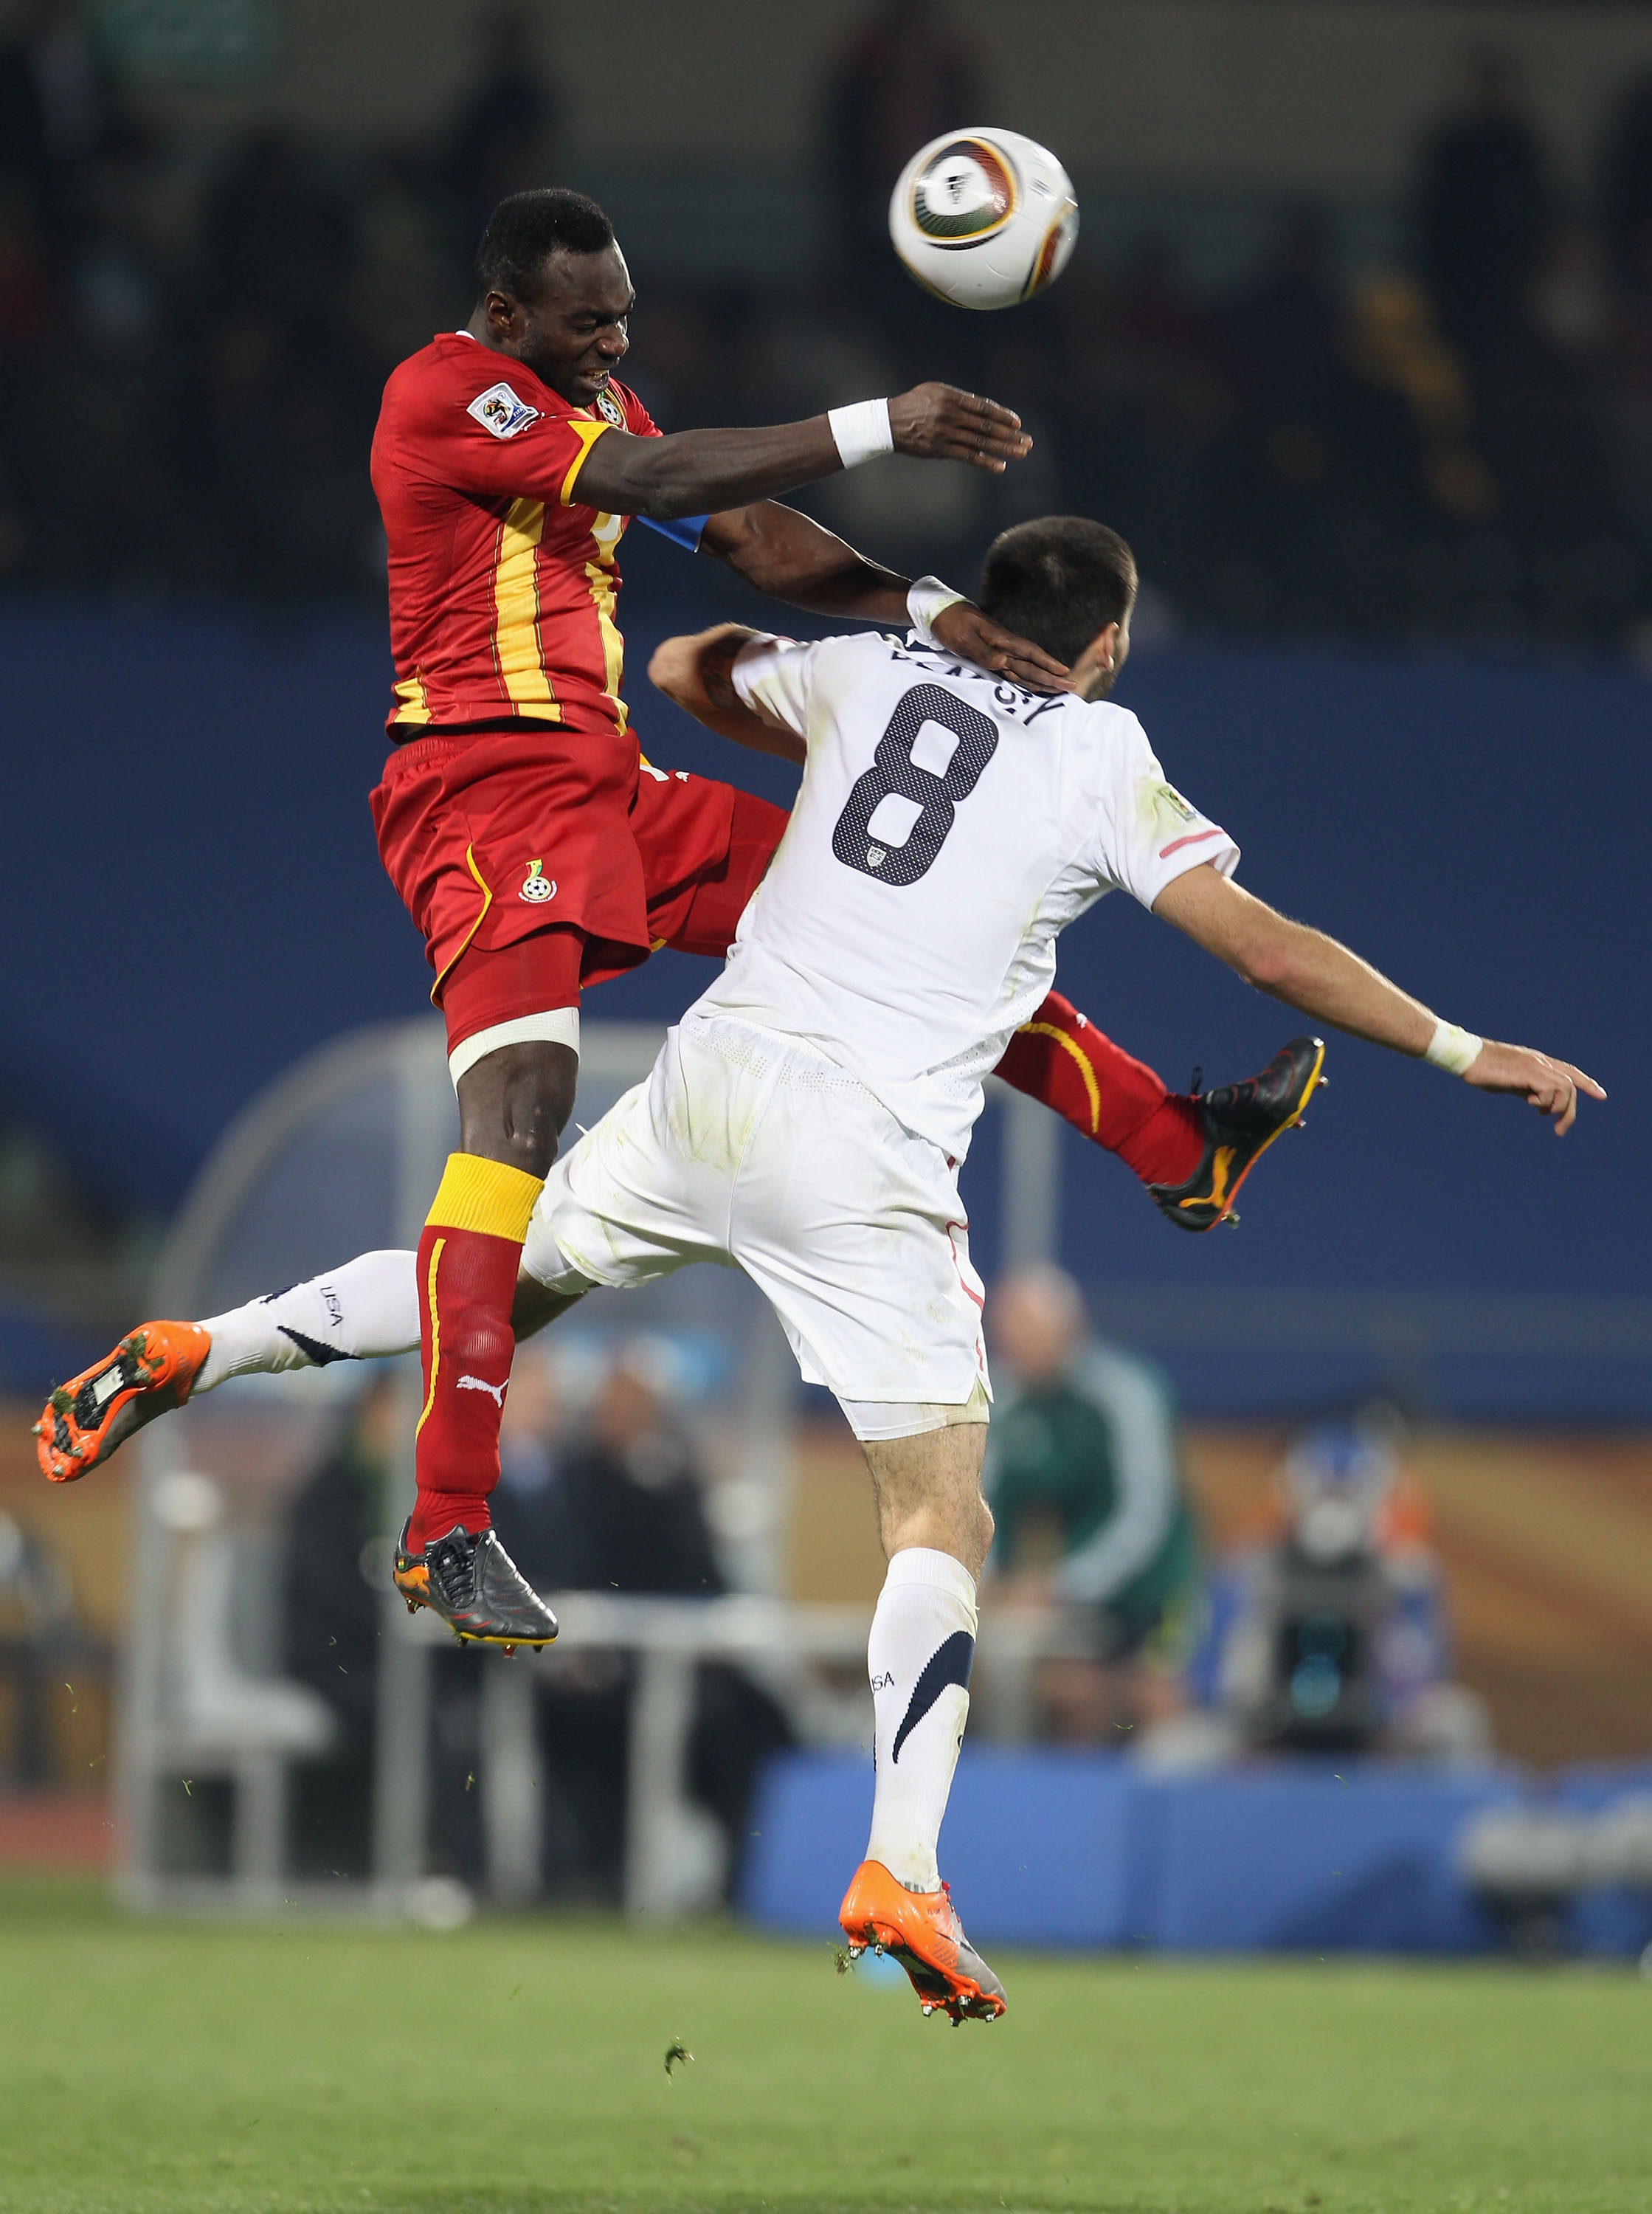 RUSTENBURG, SOUTH AFRICA - JUNE 26:  John Mensah of Ghana and Clint Dempsey of the United States jump for the ball during the 2010 FIFA World Cup South Africa Round of Sixteen match between USA and Ghana at Royal Bafokeng Stadium on June 26, 2010 in Ruste